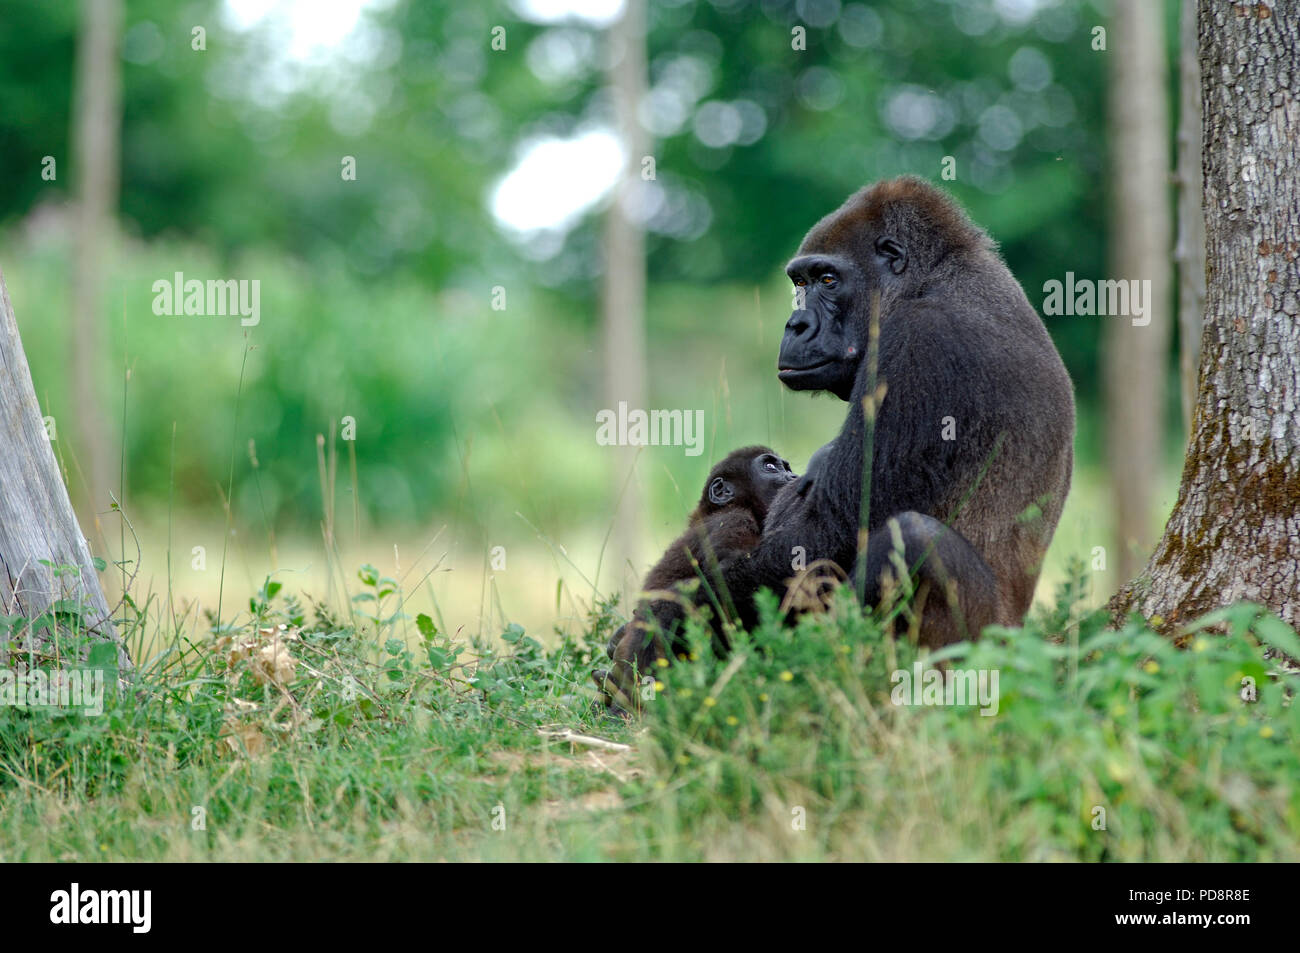 Page 3 - Singe High Resolution Stock Photography and Images - Alamy